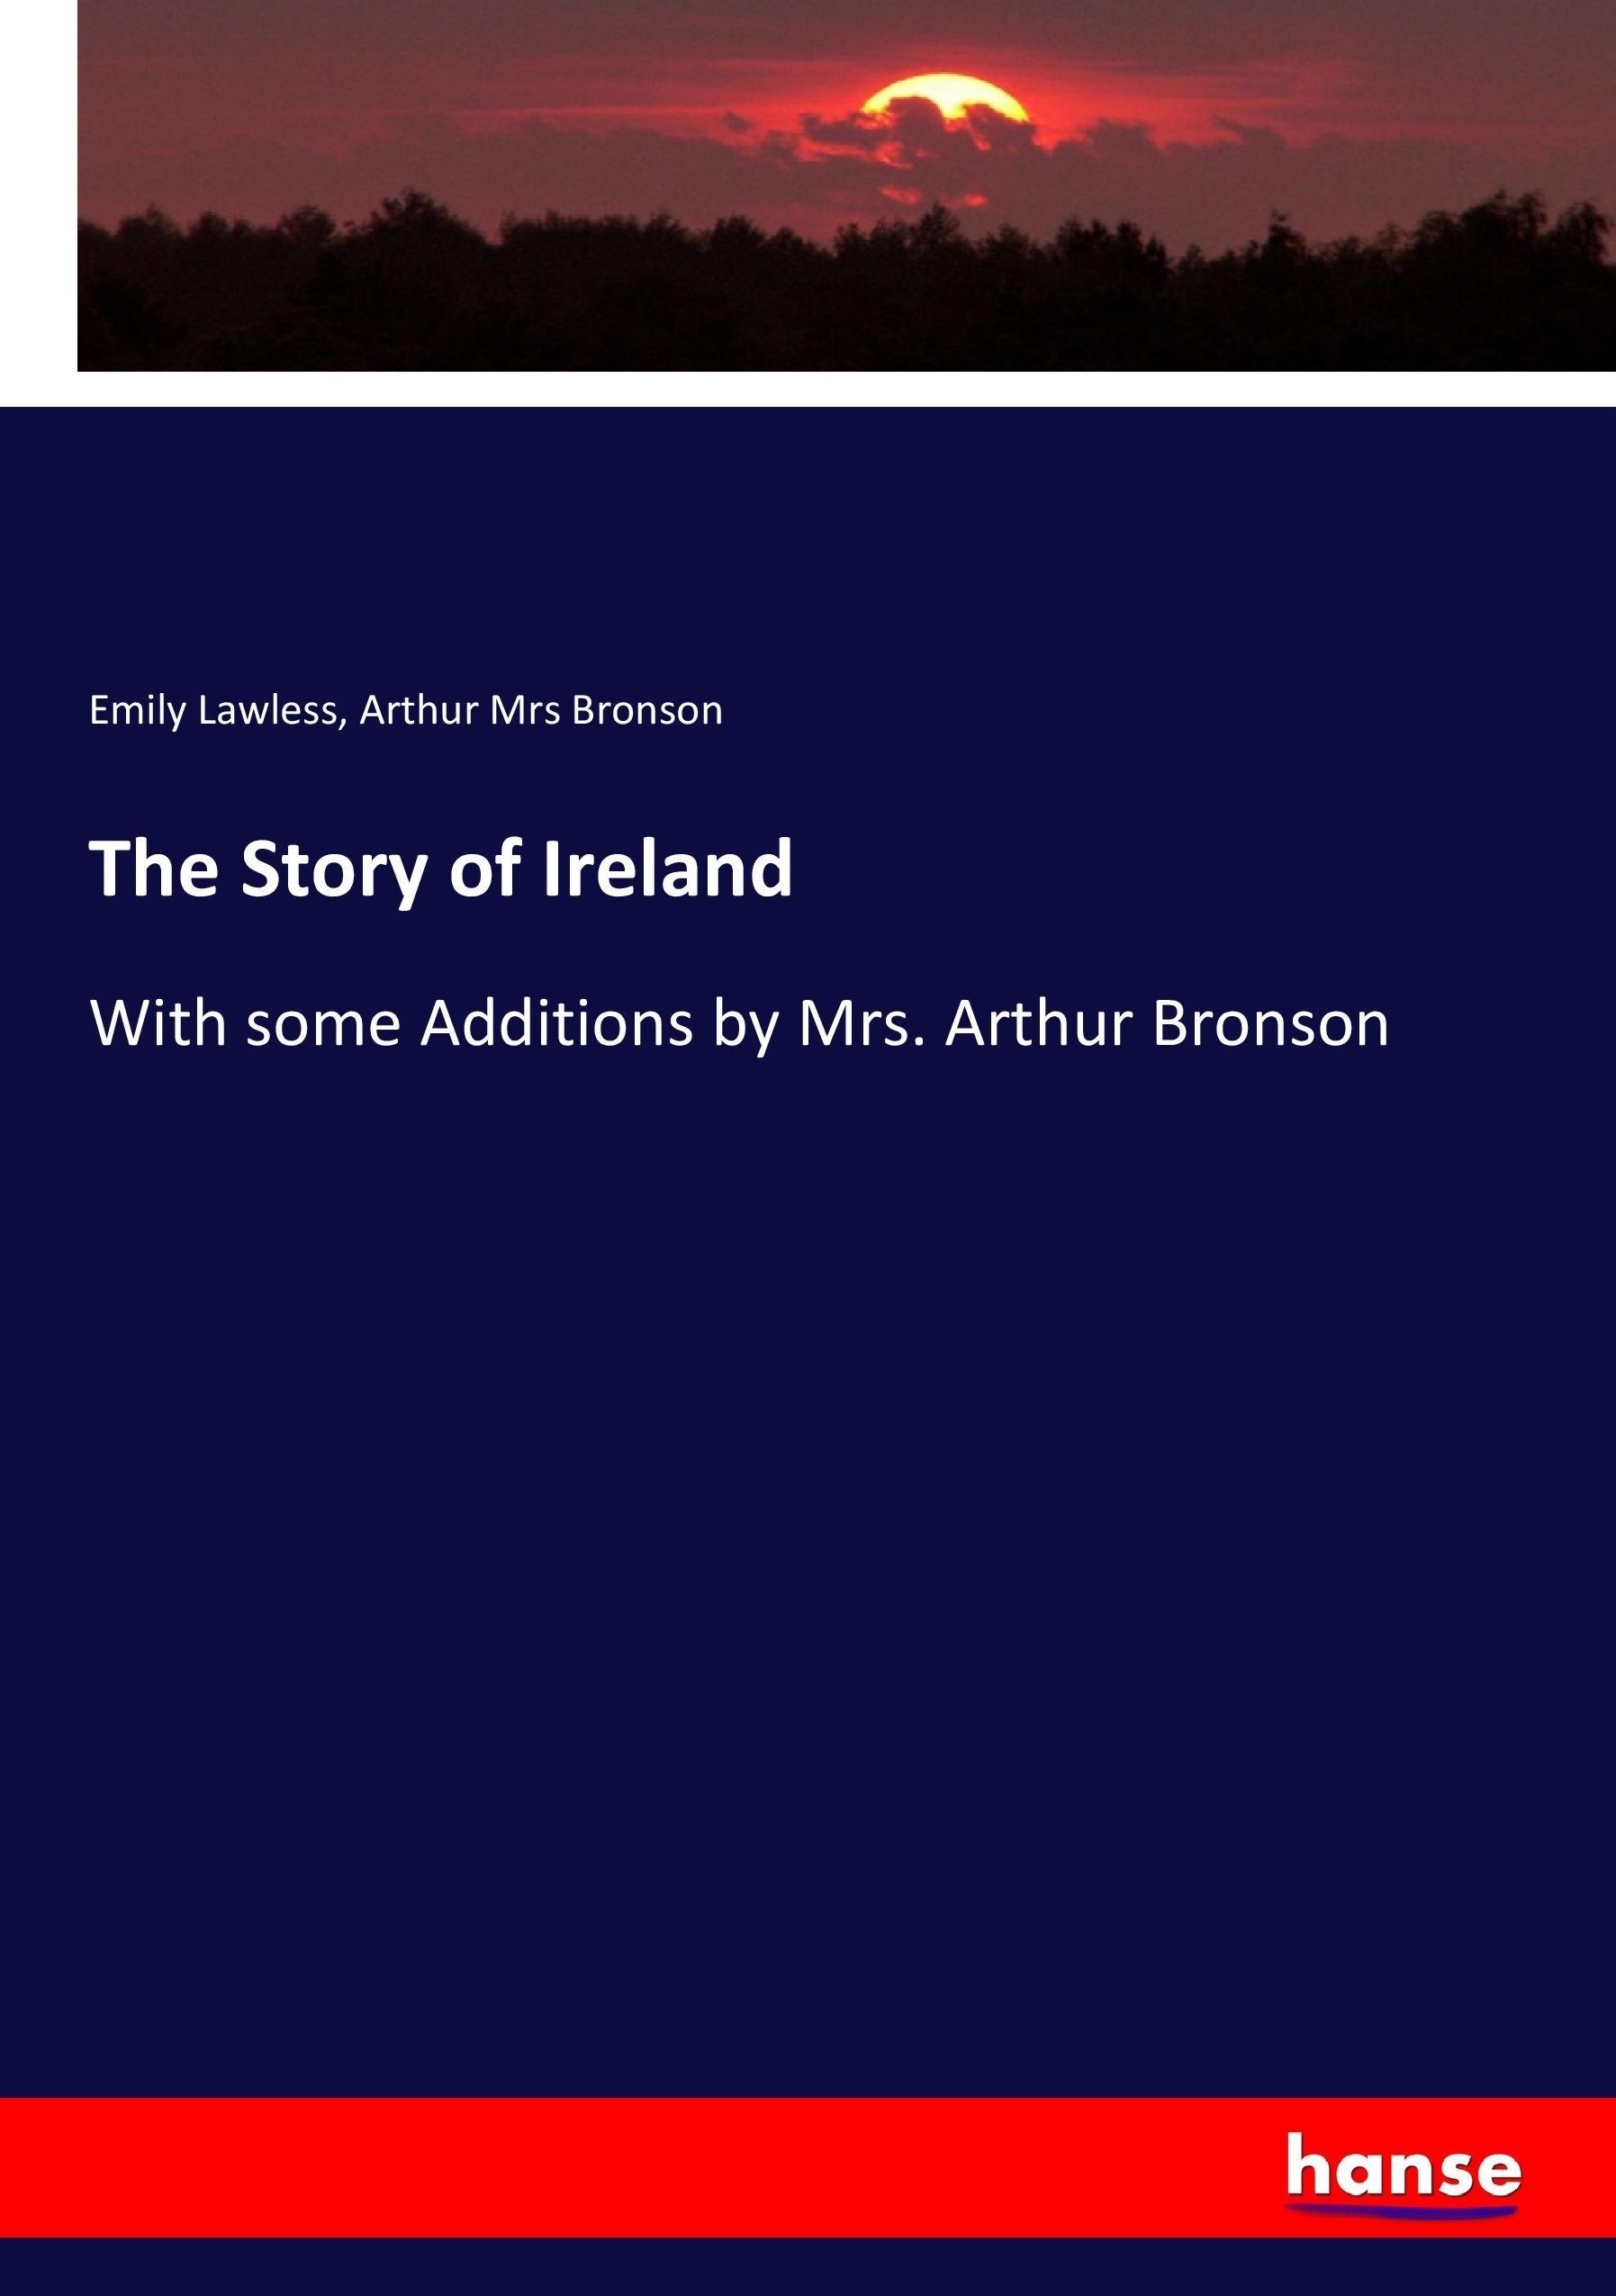 The Story of Ireland / With some Additions by Mrs. Arthur Bronson / Emily Lawless (u. a.) / Taschenbuch / Paperback / 468 S. / Englisch / 2017 / hansebooks / EAN 9783337139872 - Lawless, Emily